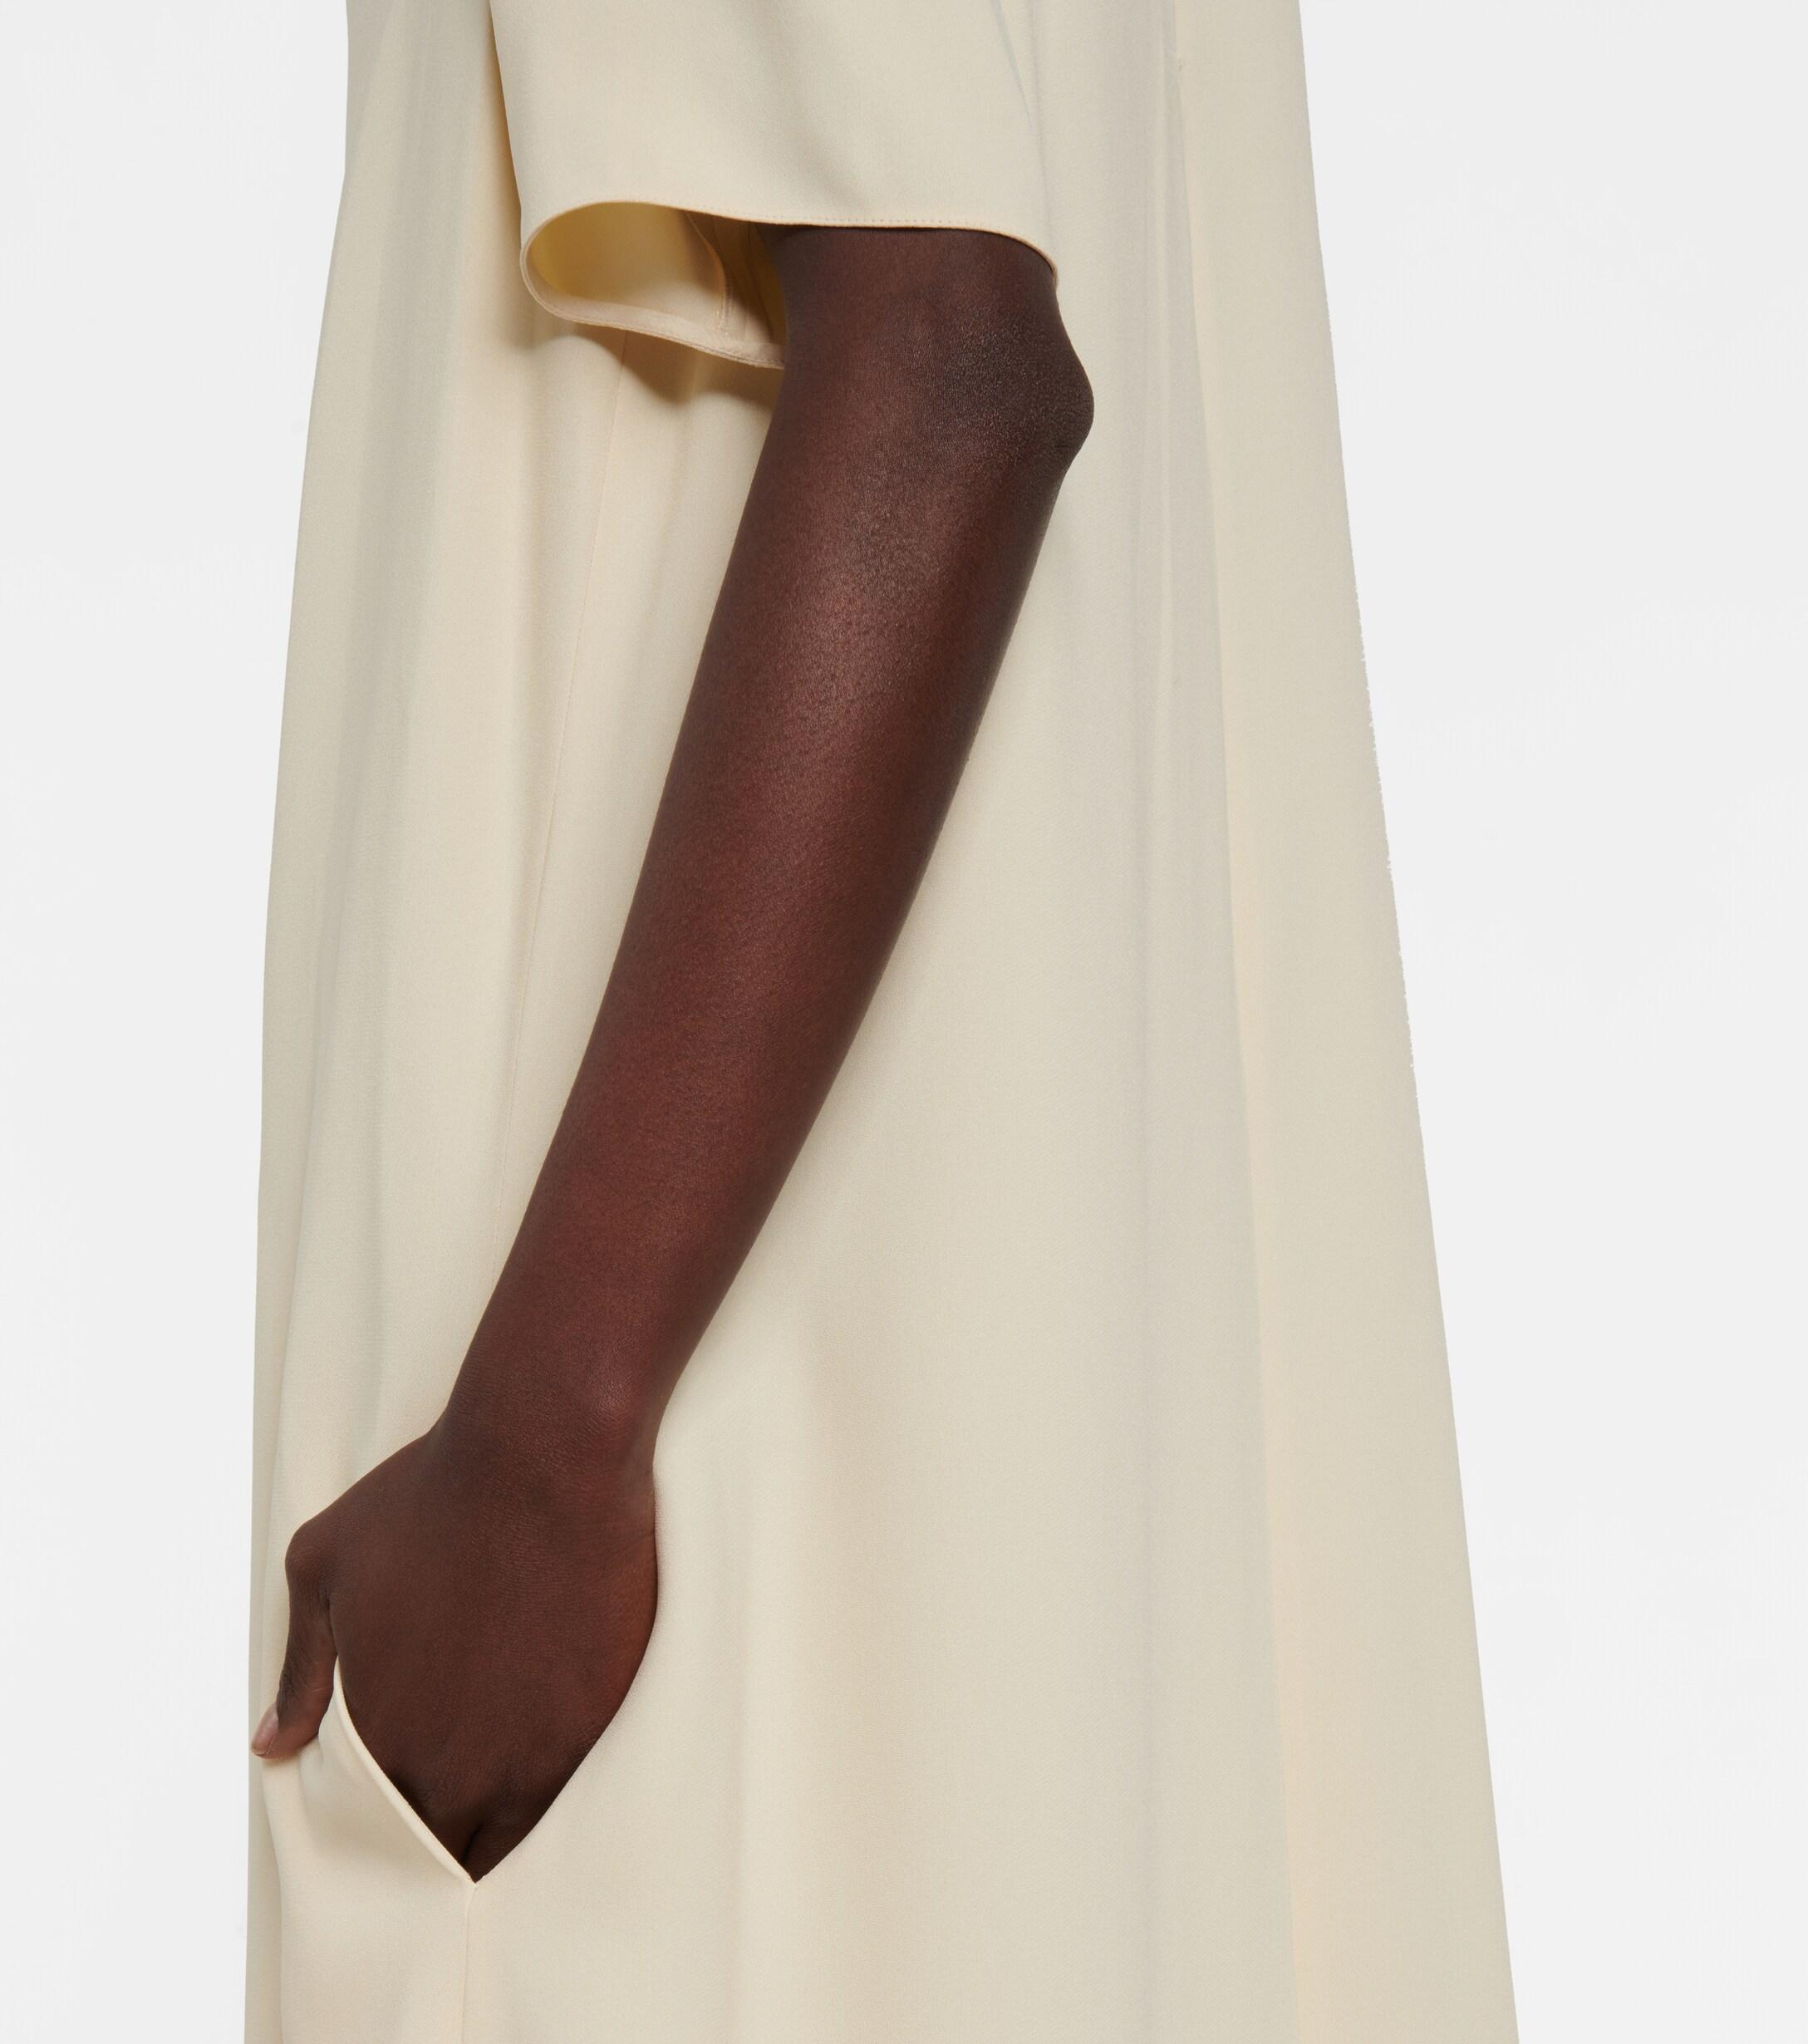 The Row Robi Cady T-shirt Maxi Dress in White | Lyst